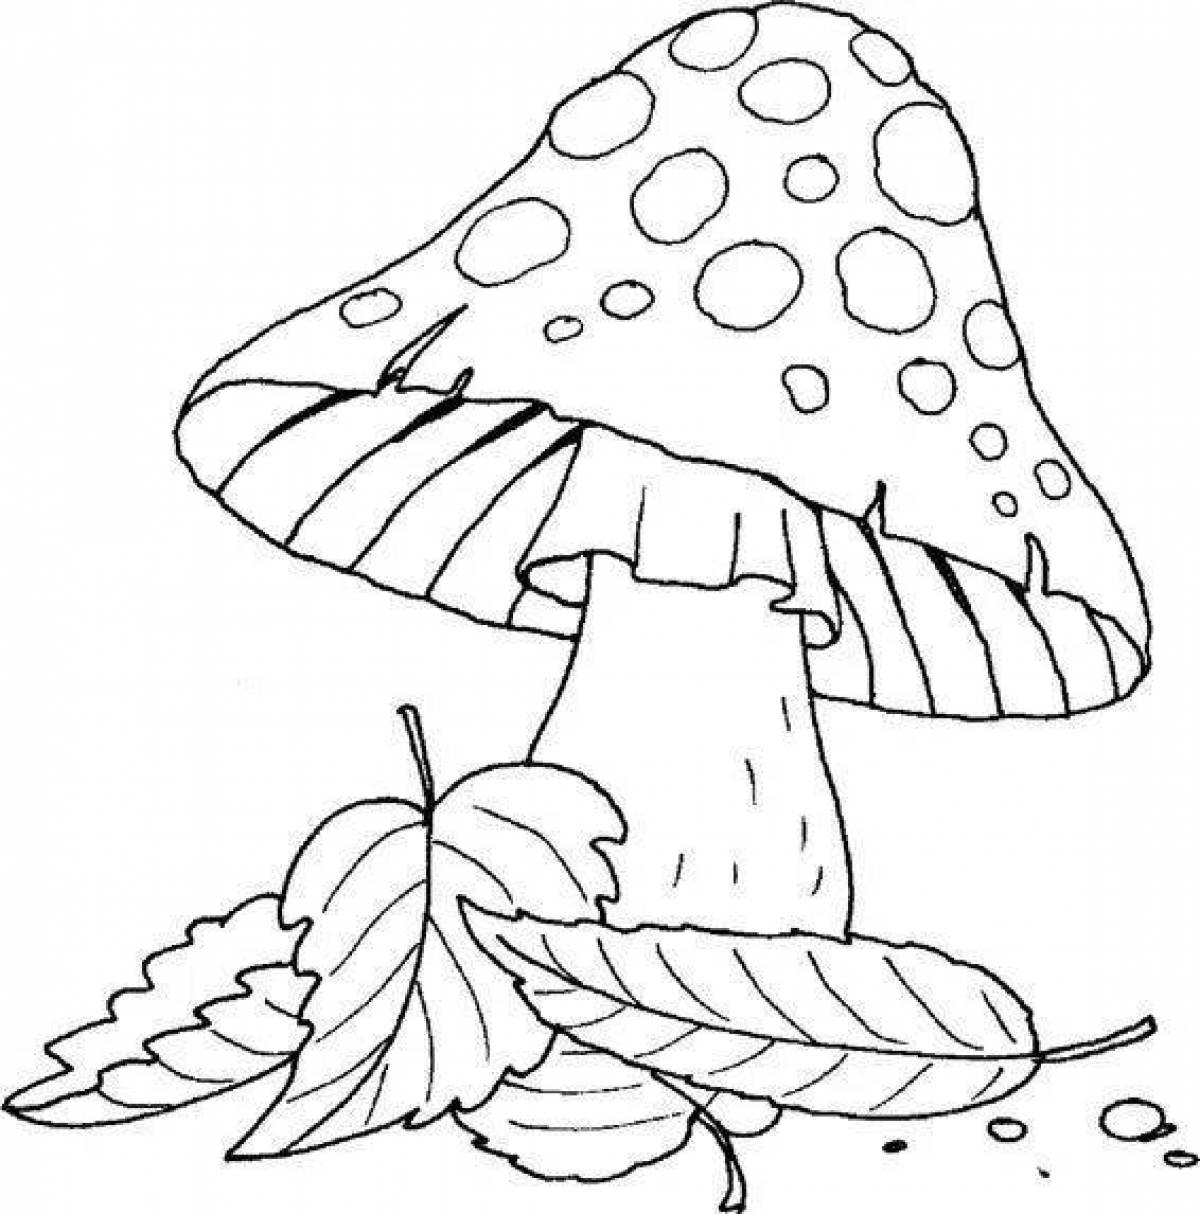 Fat fly agaric coloring page